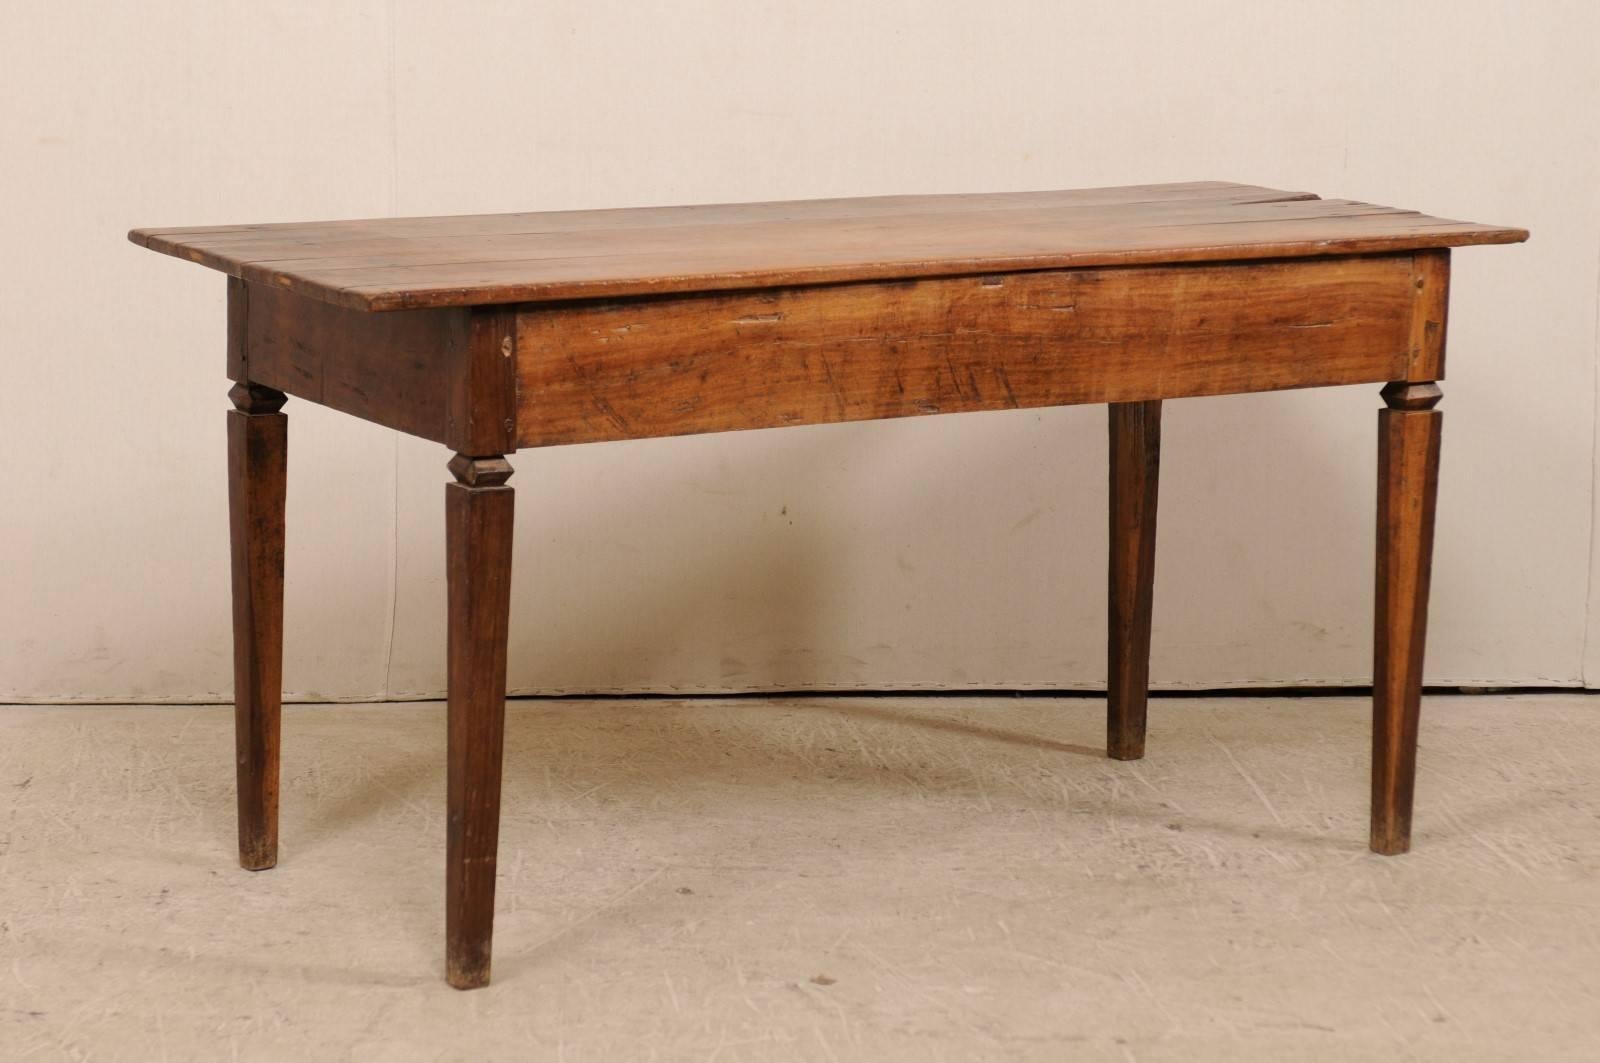 A Brazilian peroba wood table from the 19th century. This antique Brazilian has a rectangular-shaped top, straight skirt, and is raised upon profiled and tapered legs. The table is peroba wood (a tropical native hardwood, 35% harder than oak), and